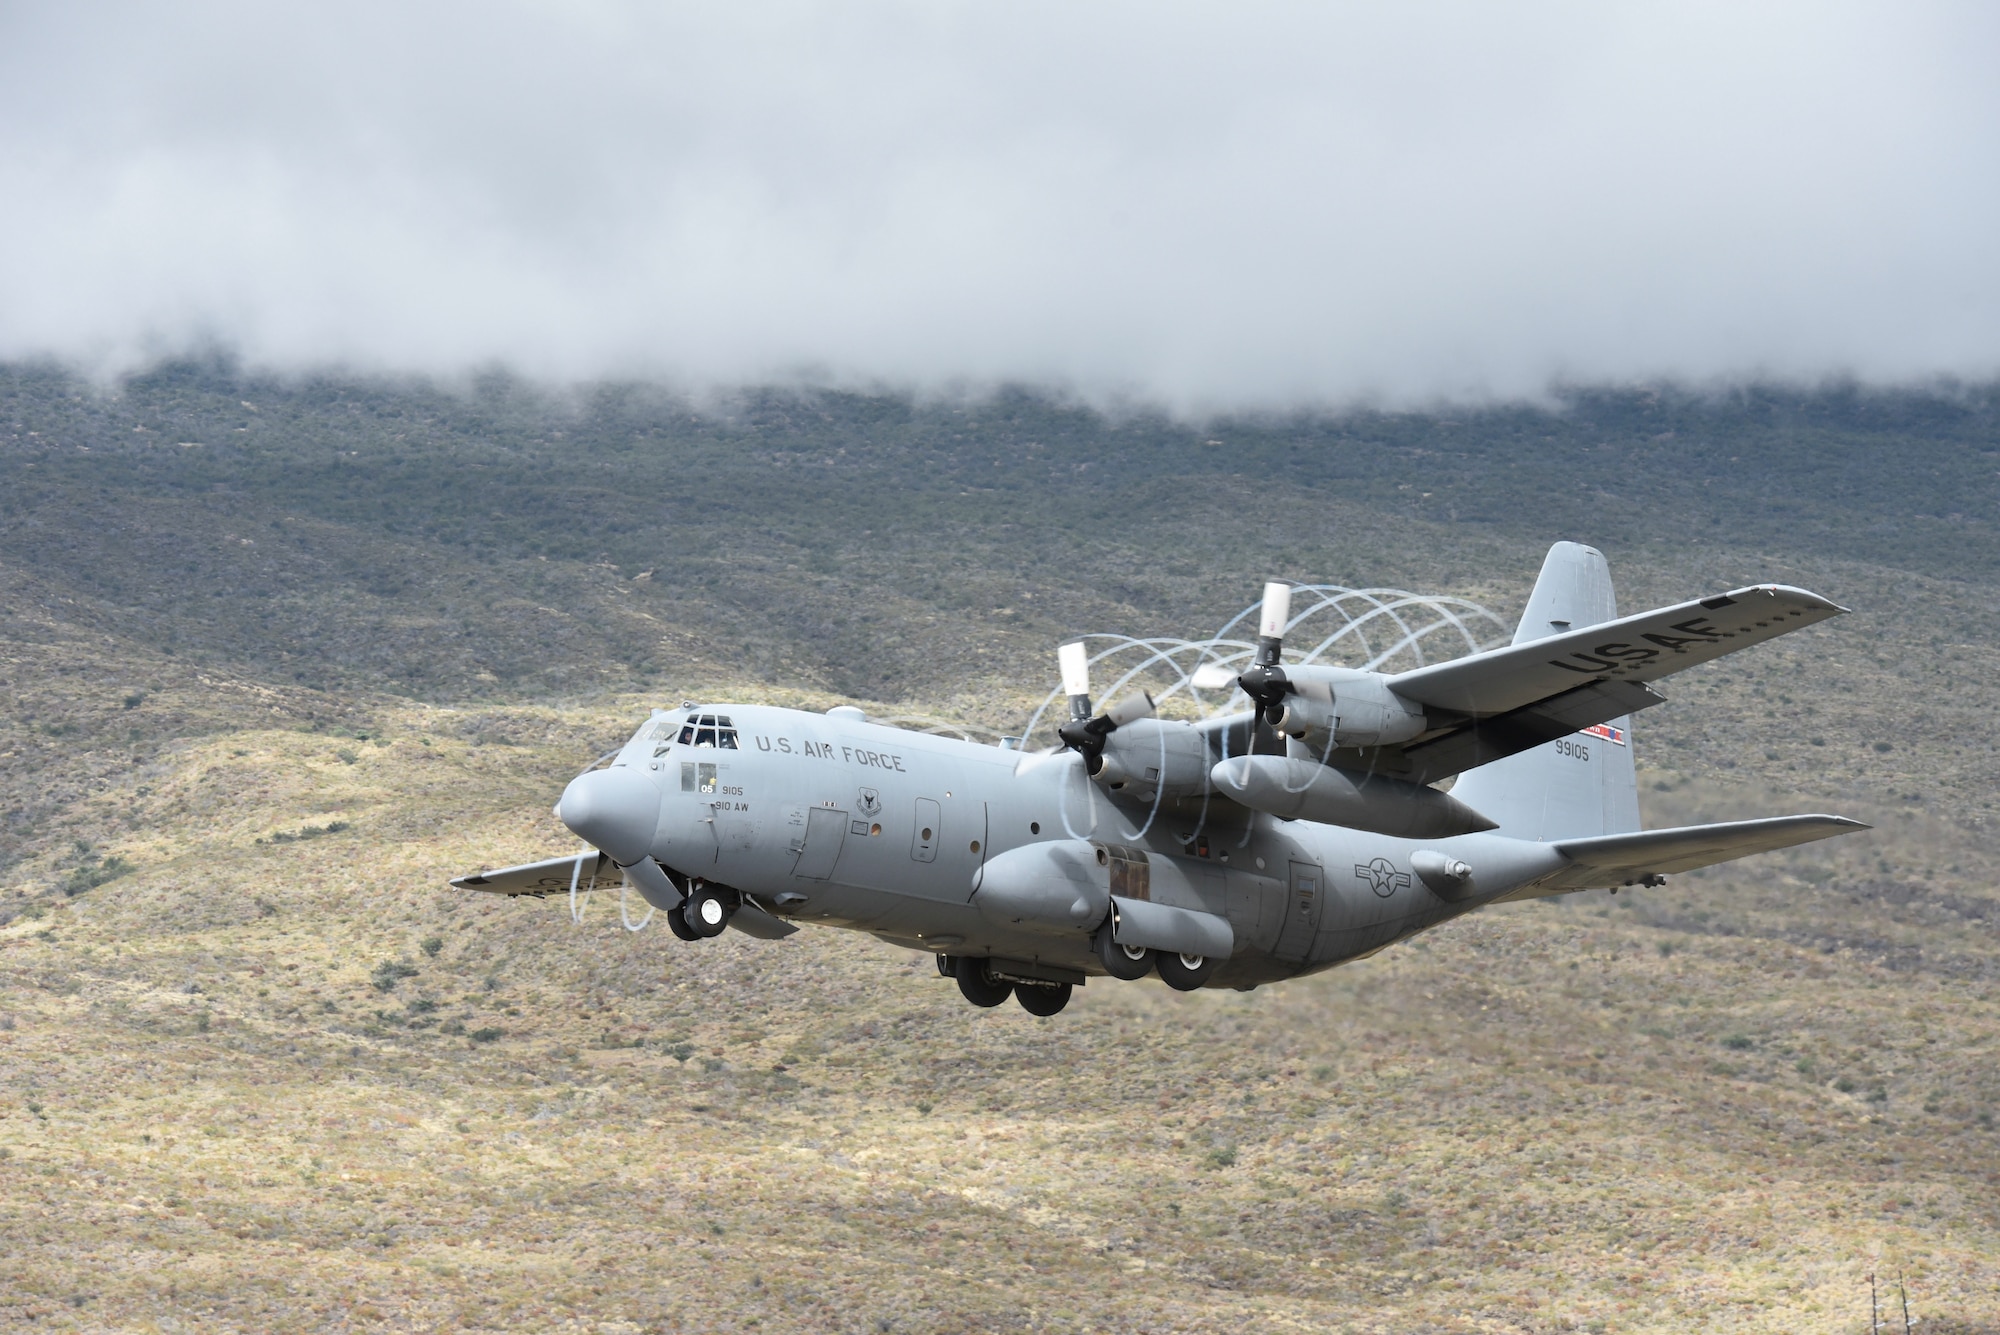 Air Force Reserve aircrews land at Bradshaw Army Airfield in a C-130H Hercules.